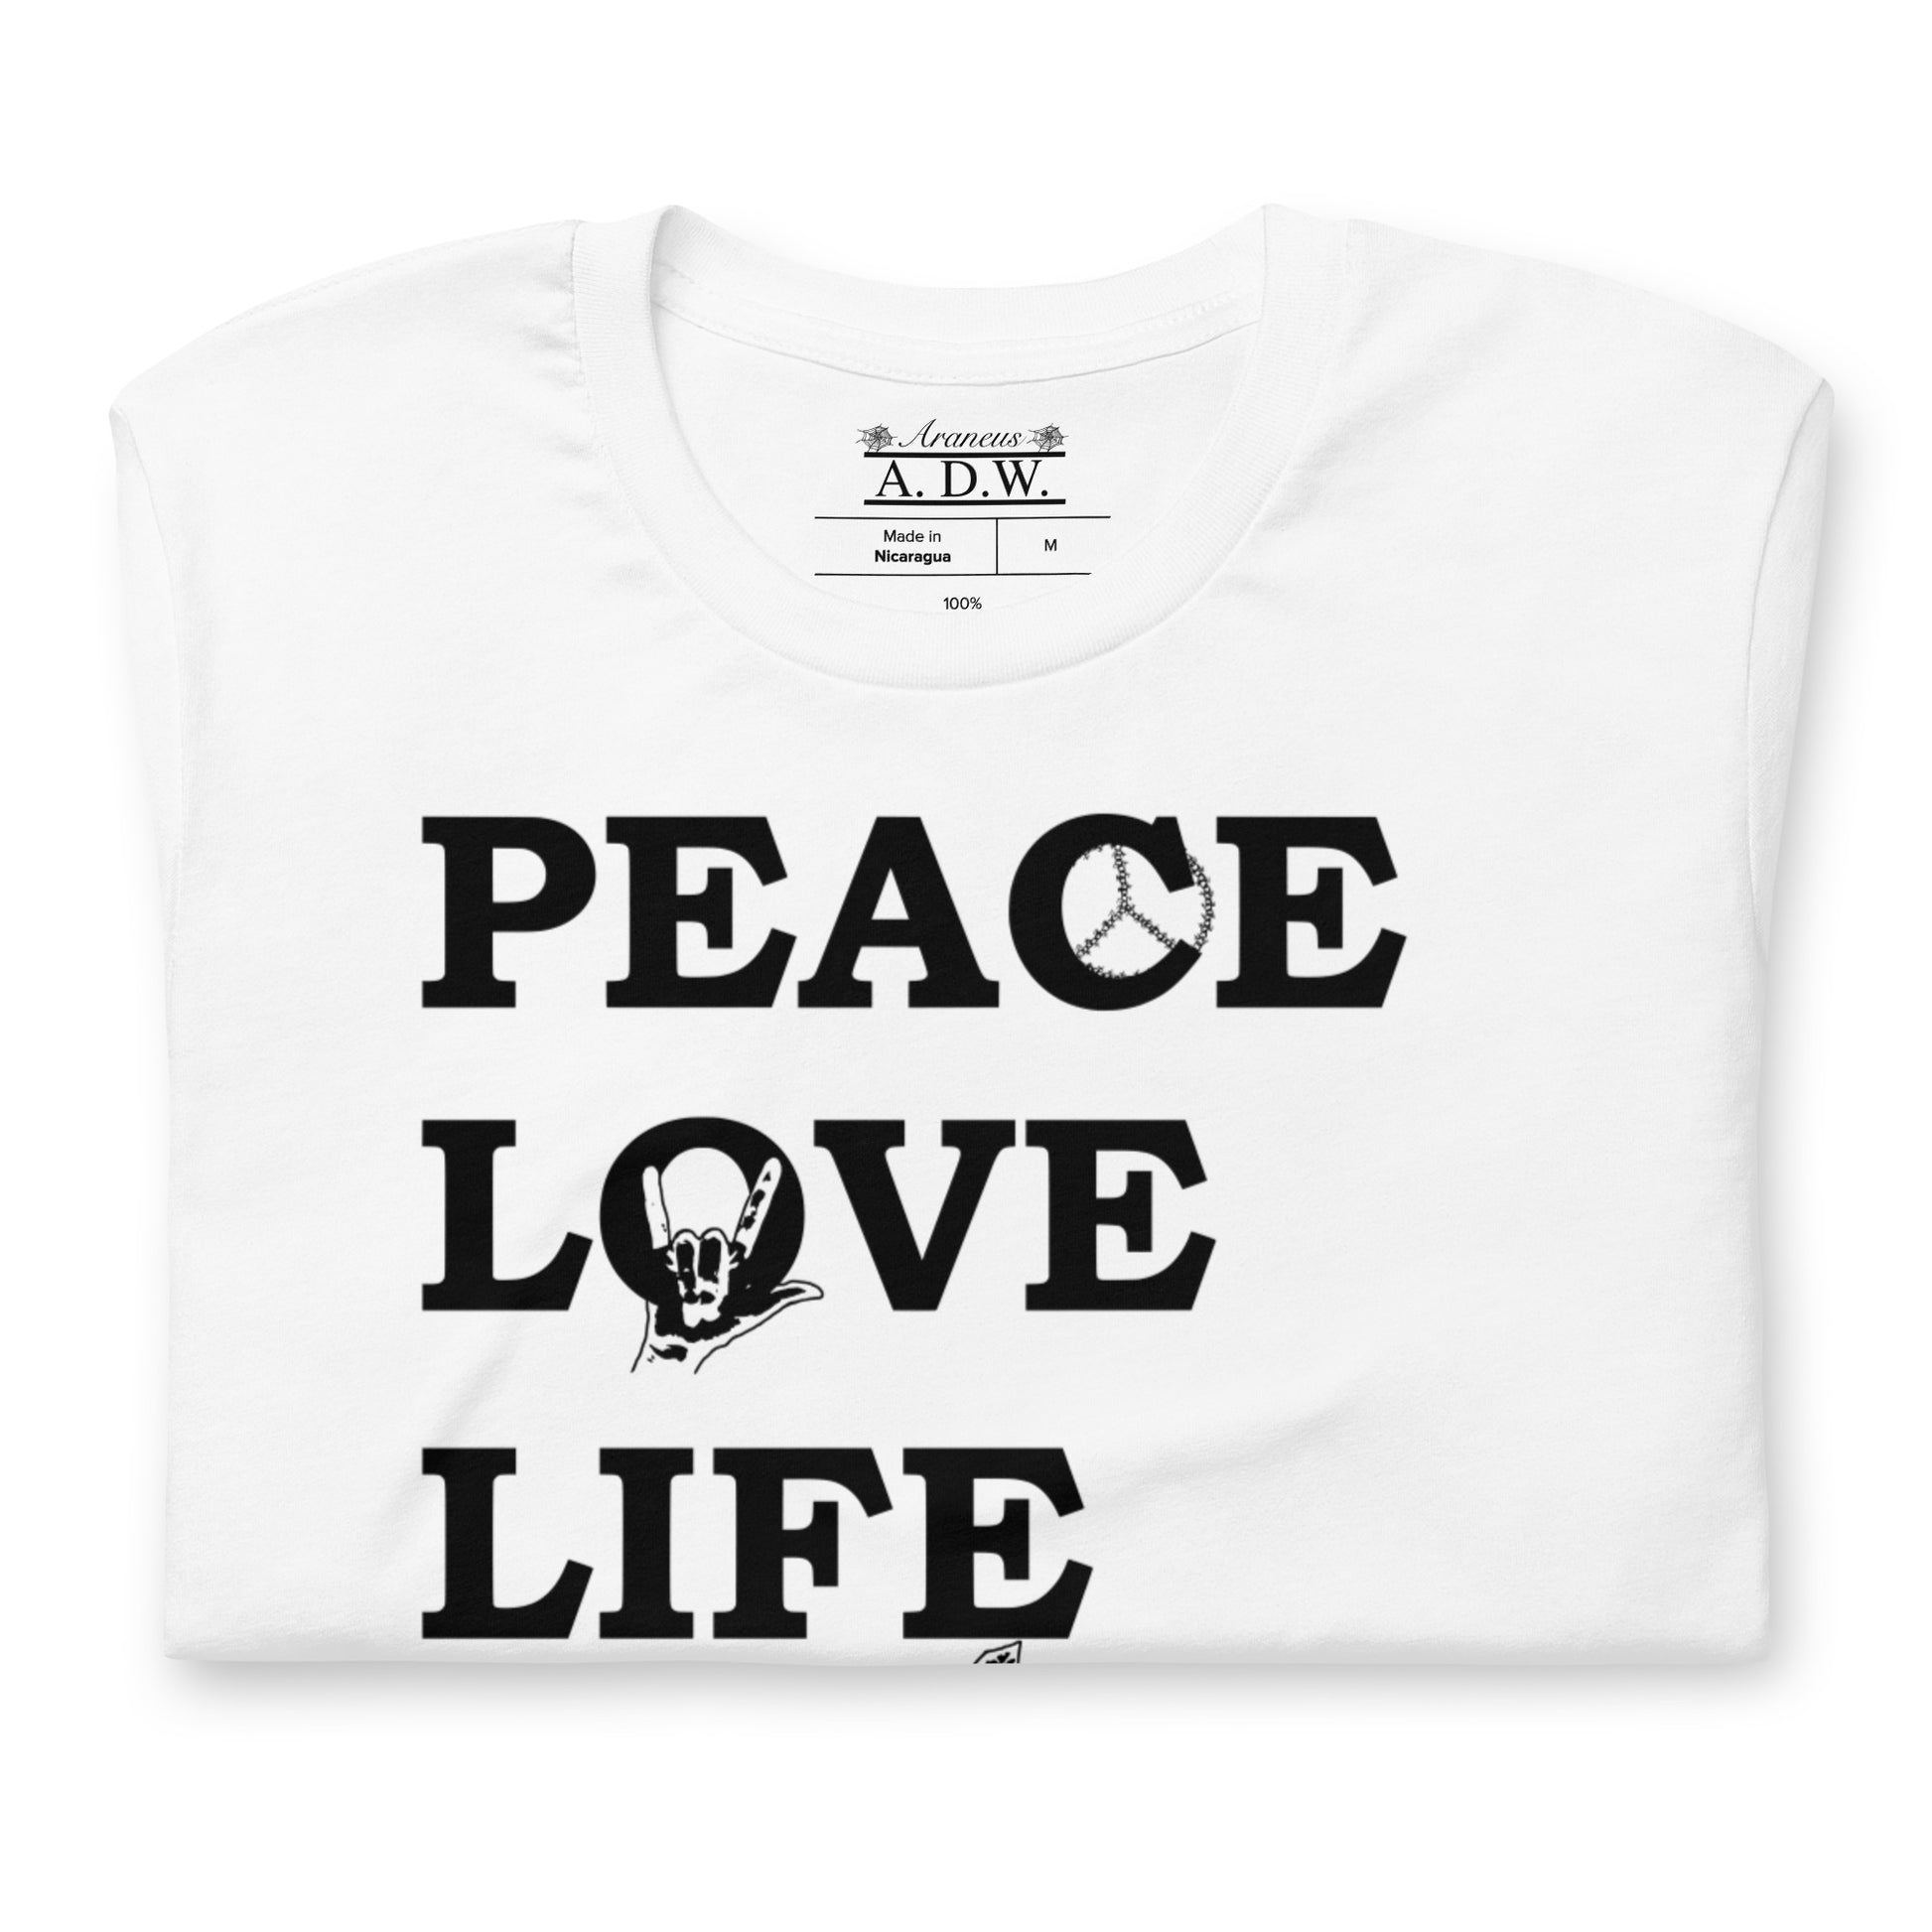 Peace Love Life Respect T Shirt - HipHatter